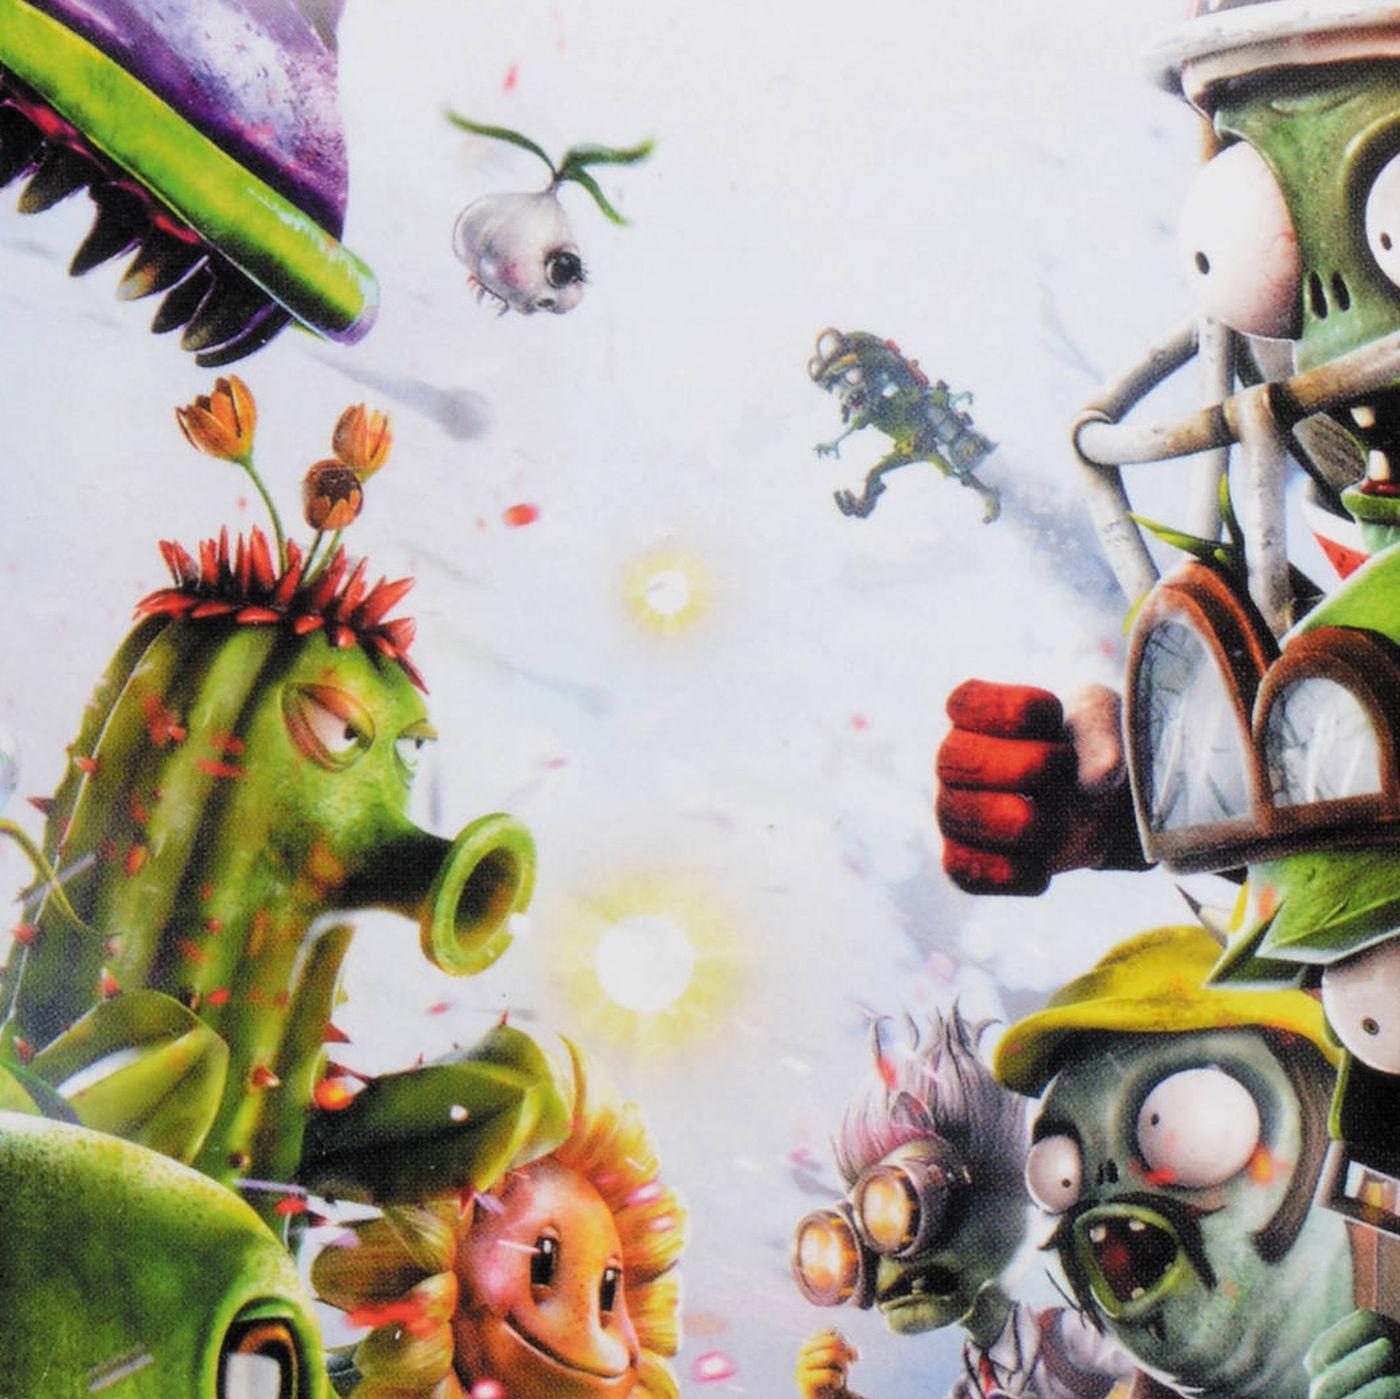 How EA and Plants vs Zombies are battling binge culture   Polygon